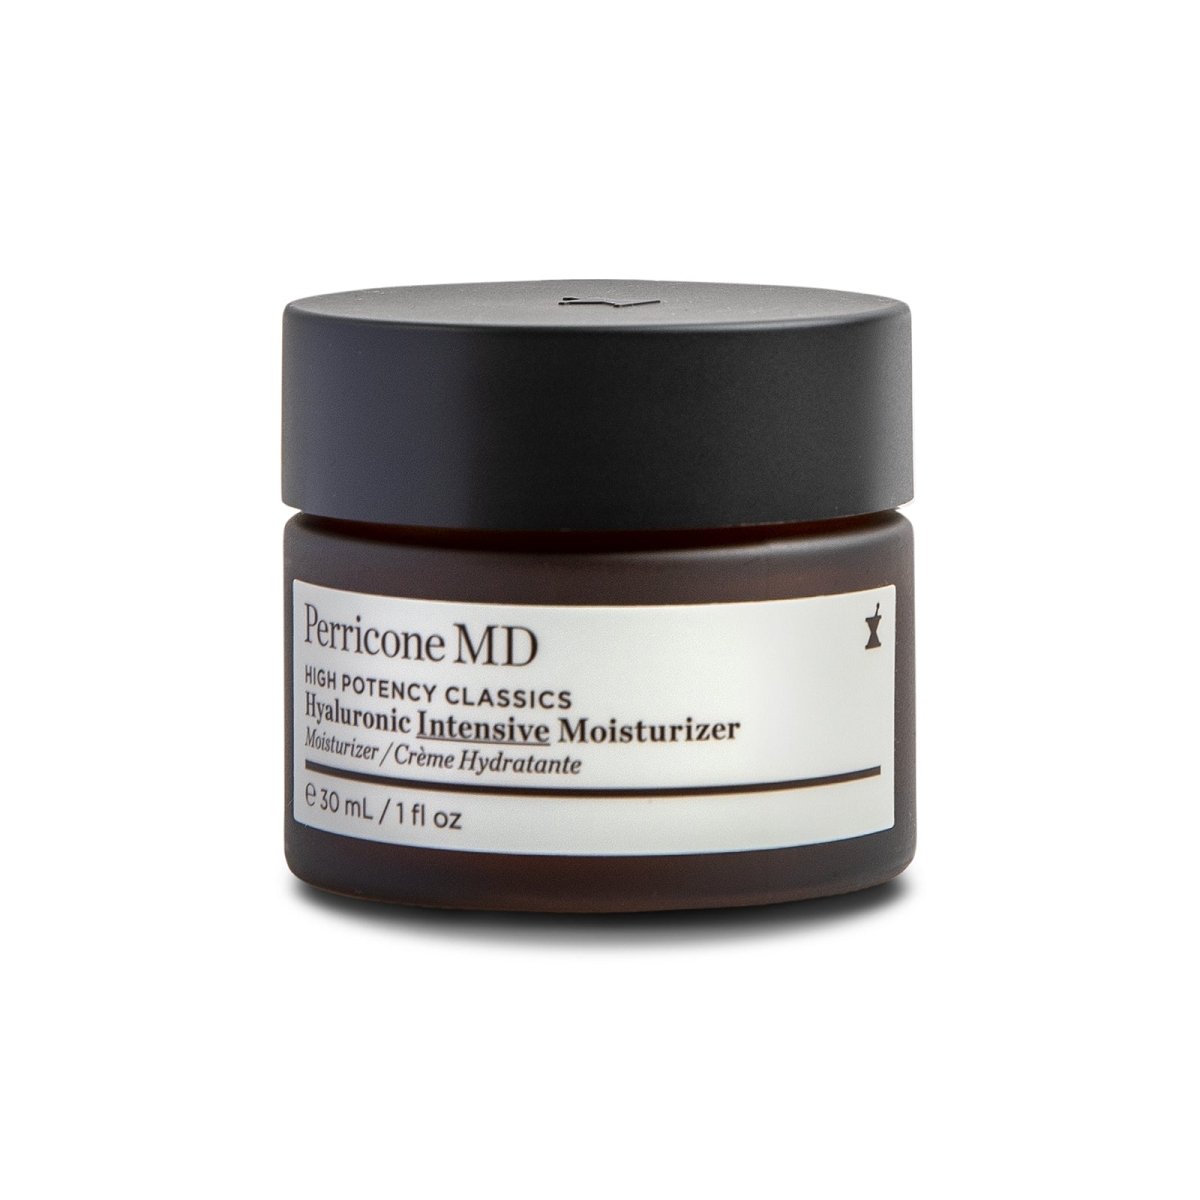 Perricone MD High Potency Classics Hyaluronic Intensive Moisturizer - SkincareEssentials